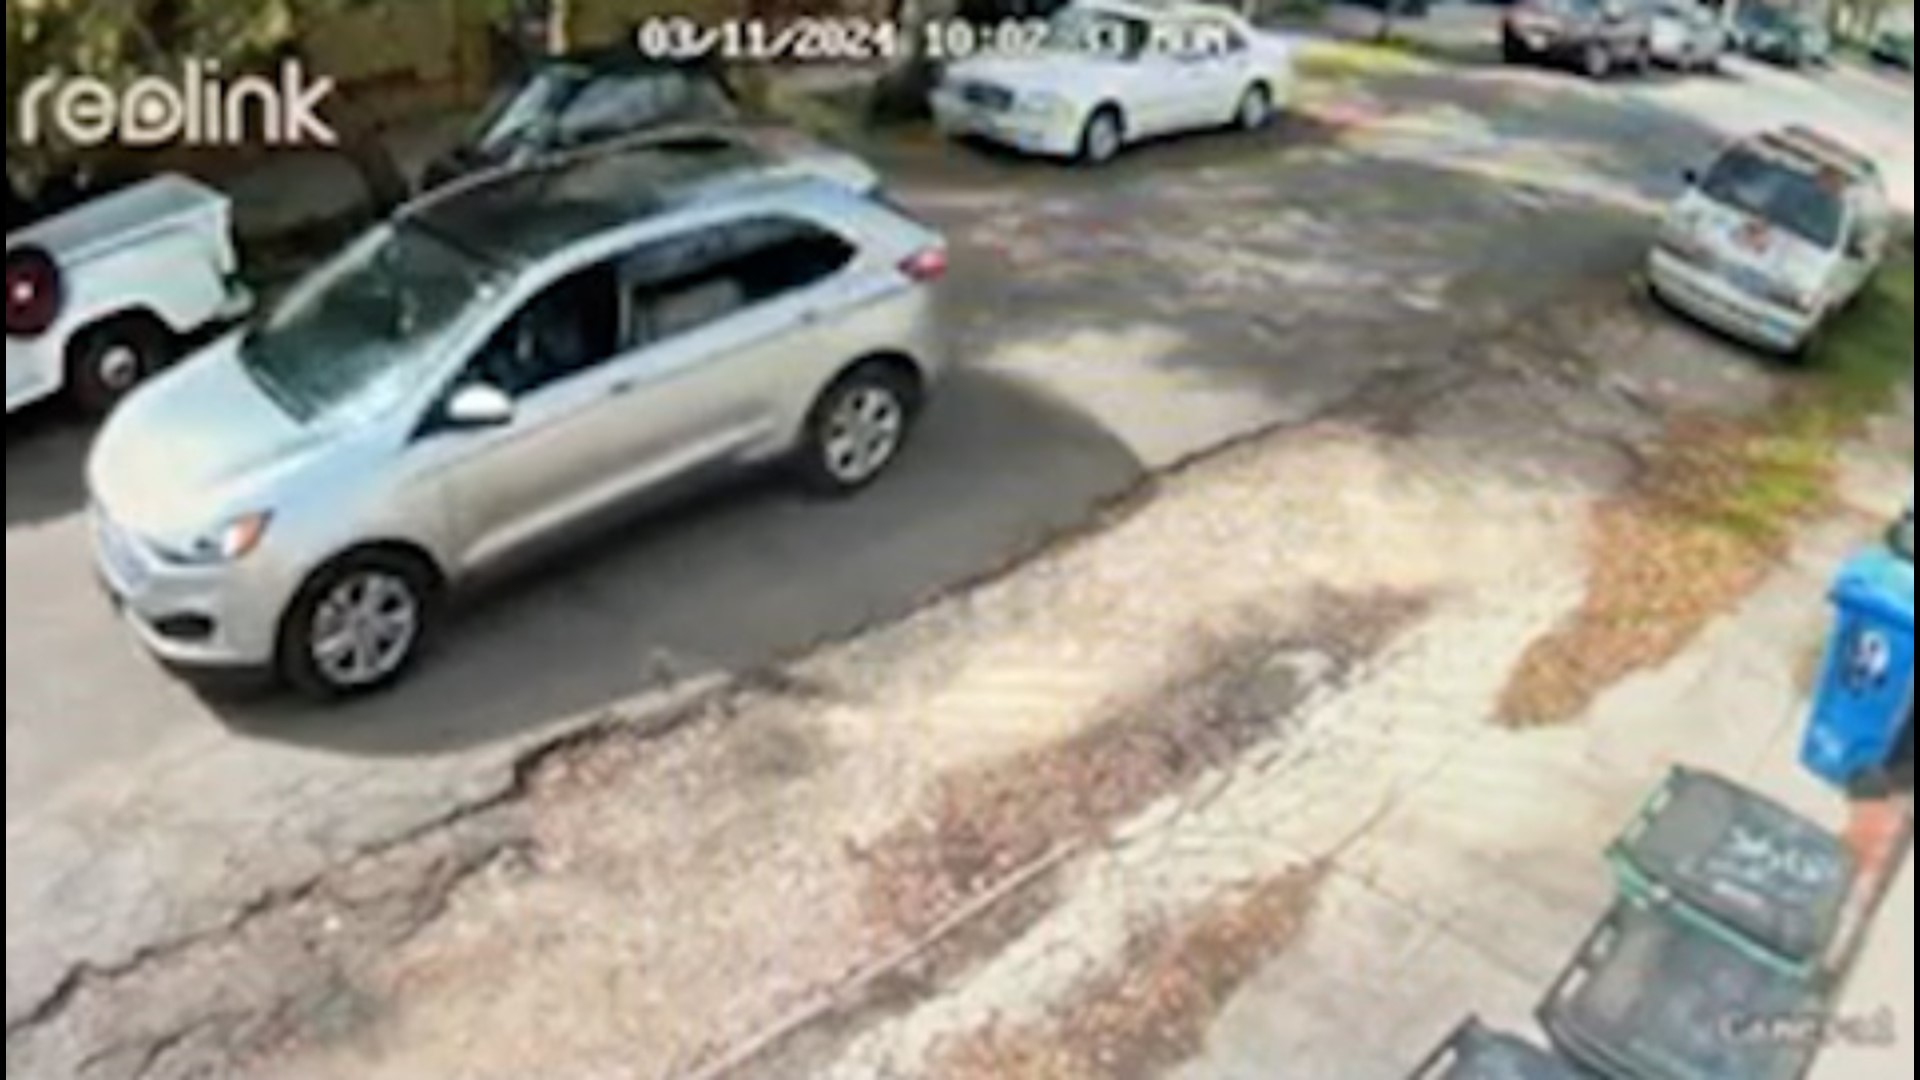 WWL Louisiana obtains security camera footage of a Ford SUV prior to striking and killing a woman in a fatal crash. NOPD is investigating the incident as a homicide.